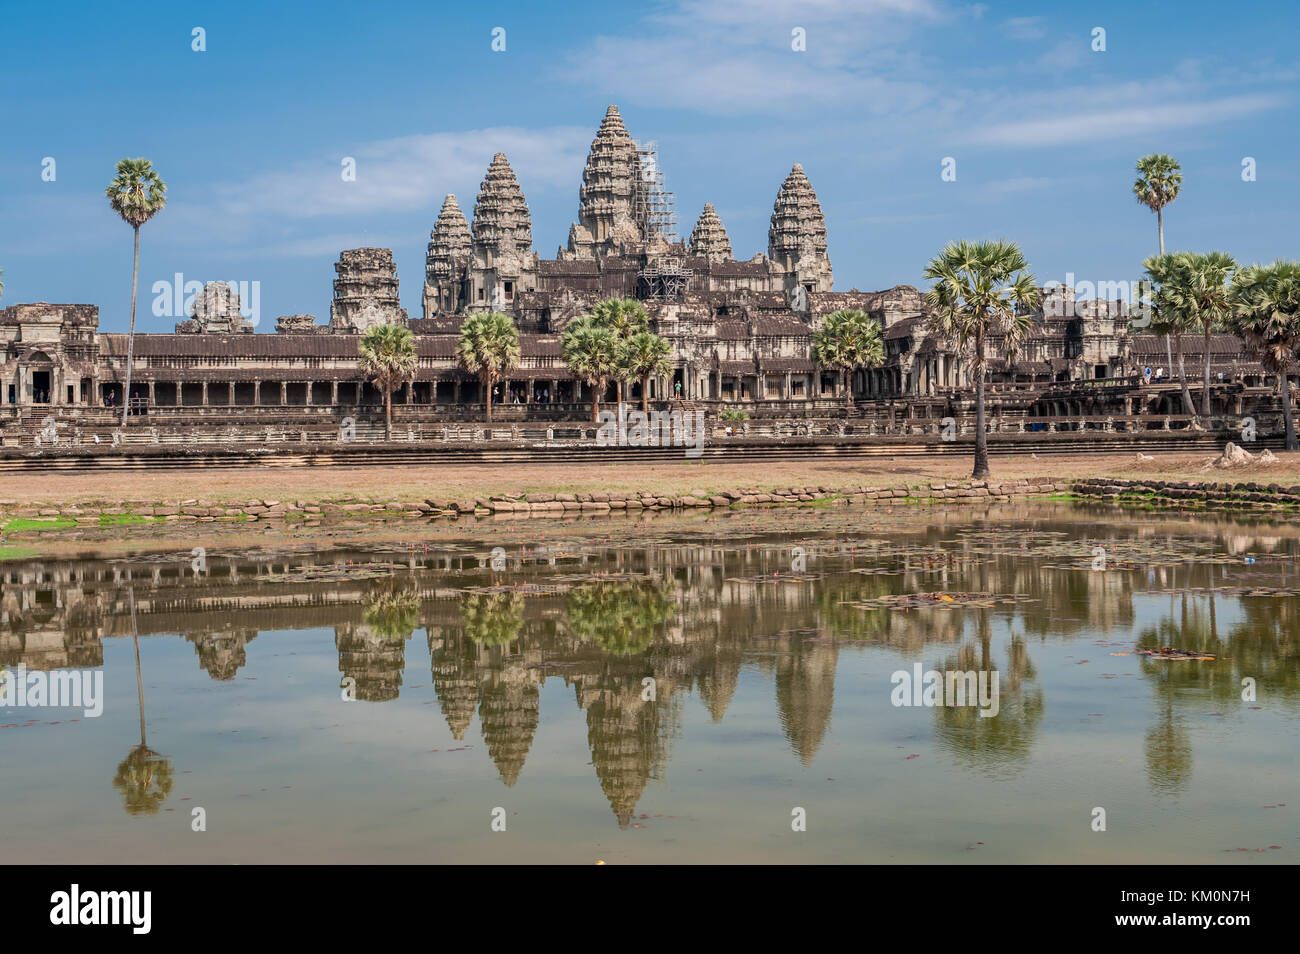 Angkor Wat is a 12th century temple and a world famous UNESCO World Heritage site in Siem Reap, Cambodia Stock Photo